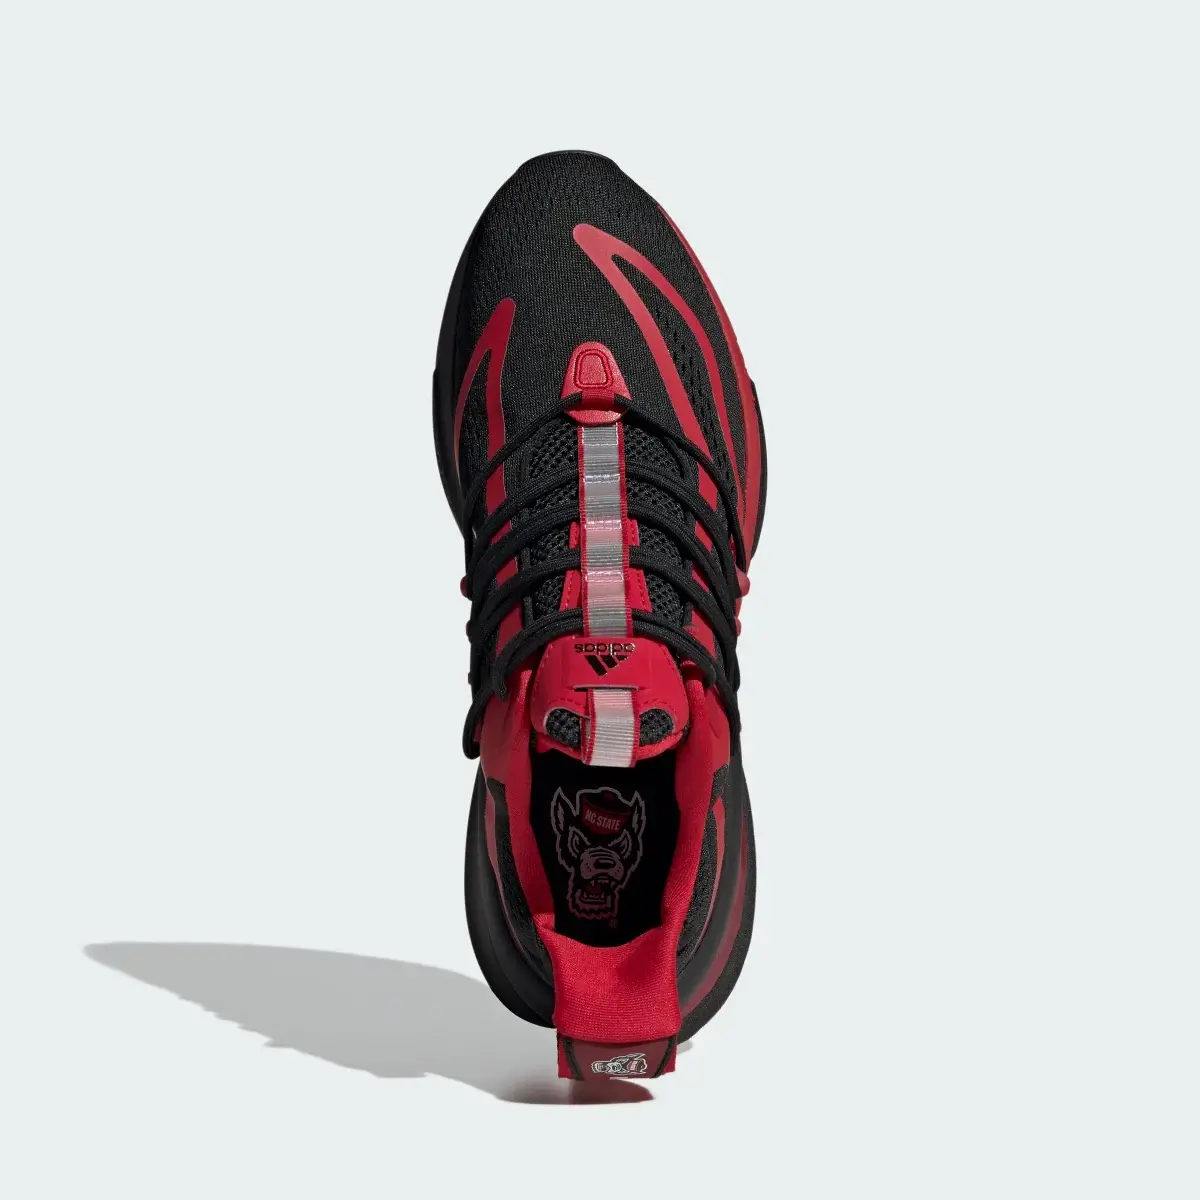 Adidas NC State Alphaboost V1 Shoes. 3